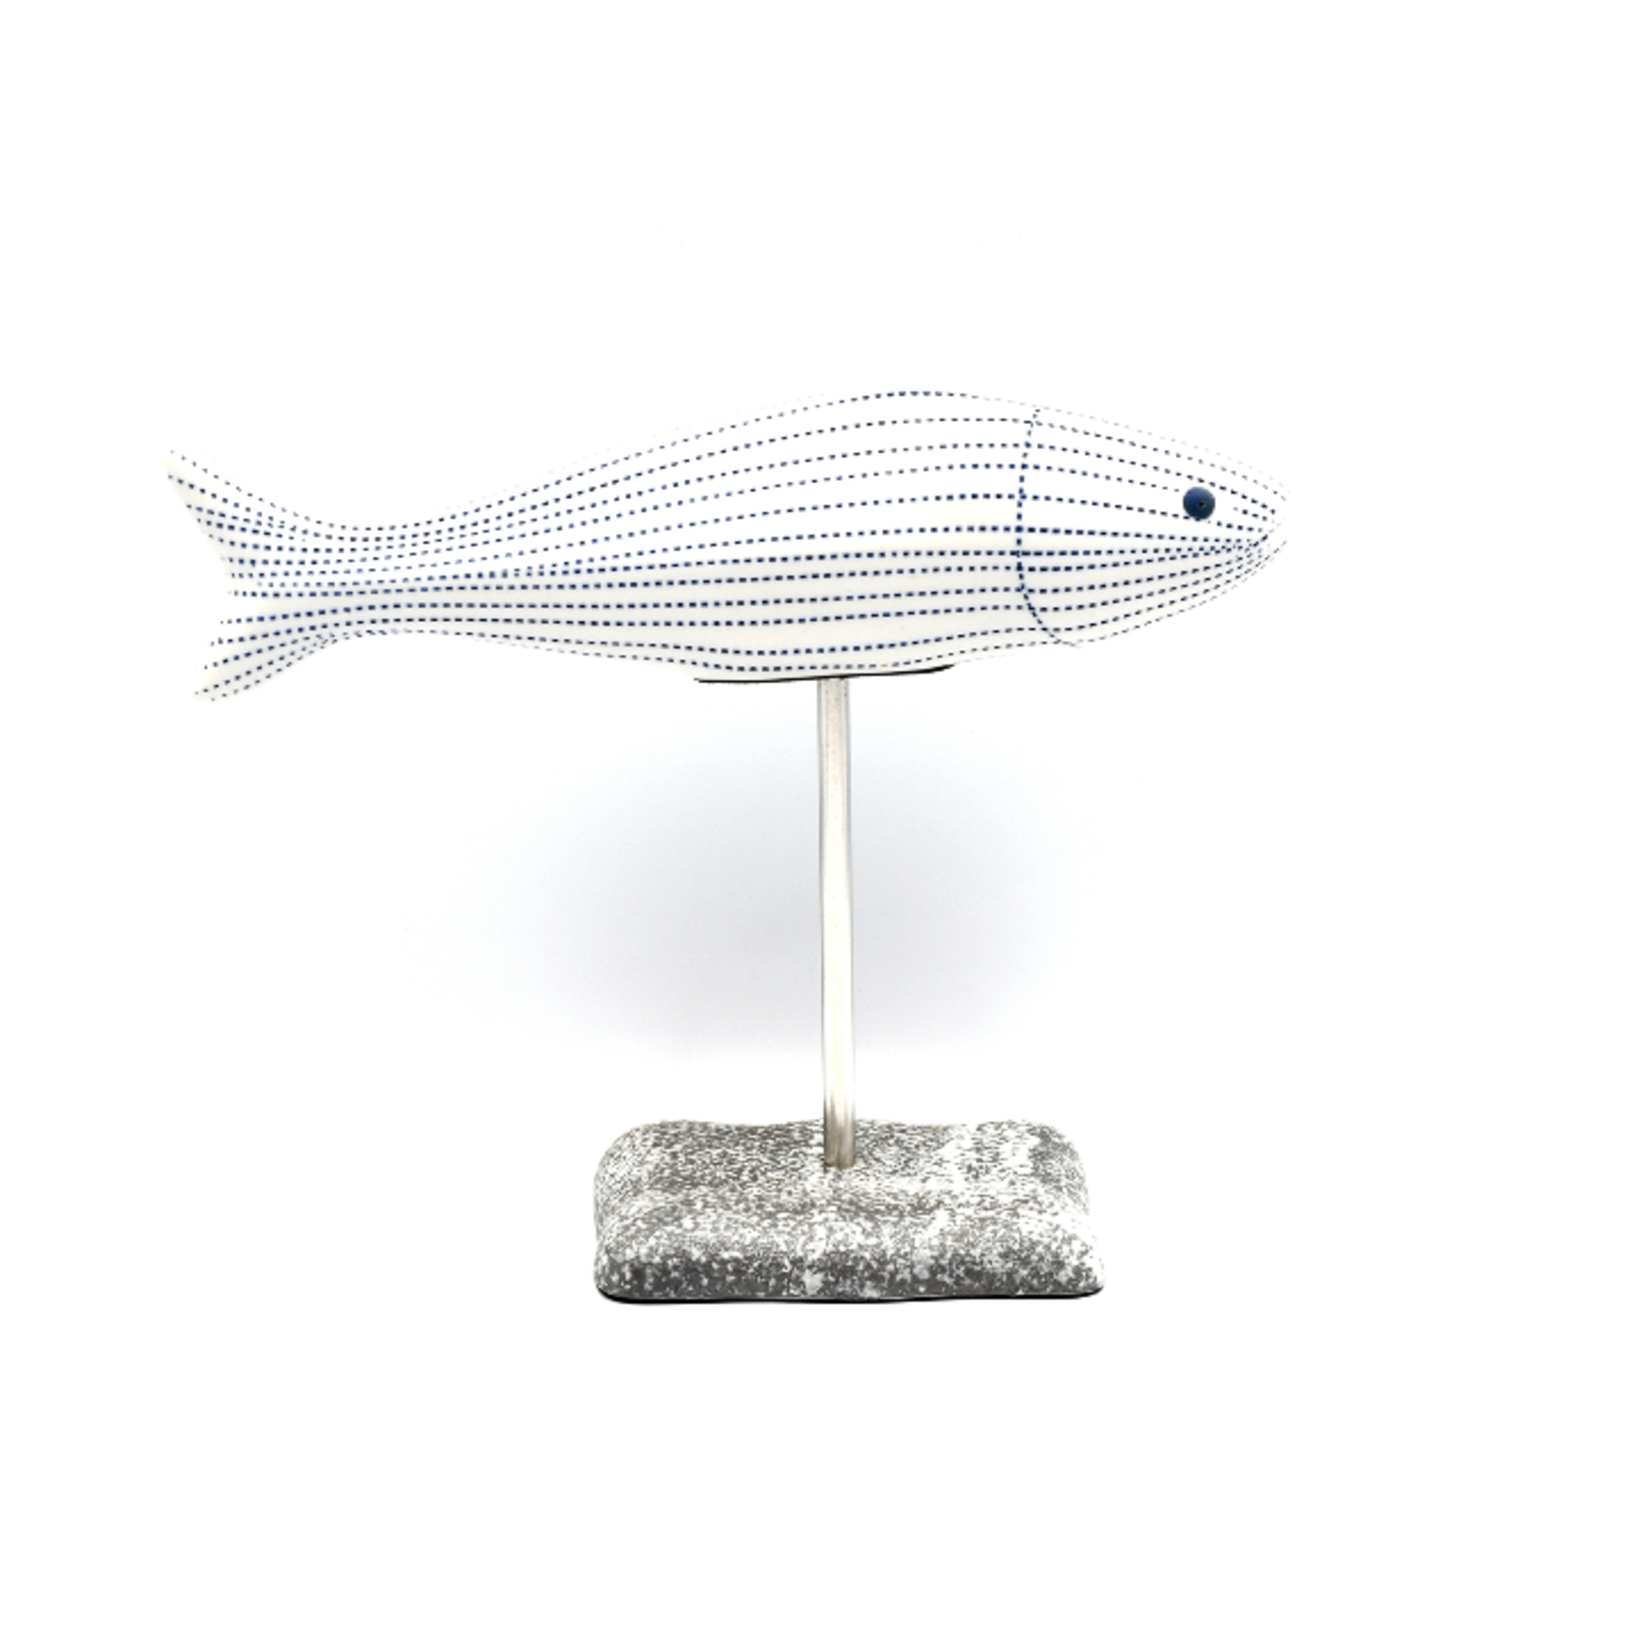 Outside The Box 7" Adrians Fish White & Blue Dots Handcrafted Porcelain Ceramic Sculpture